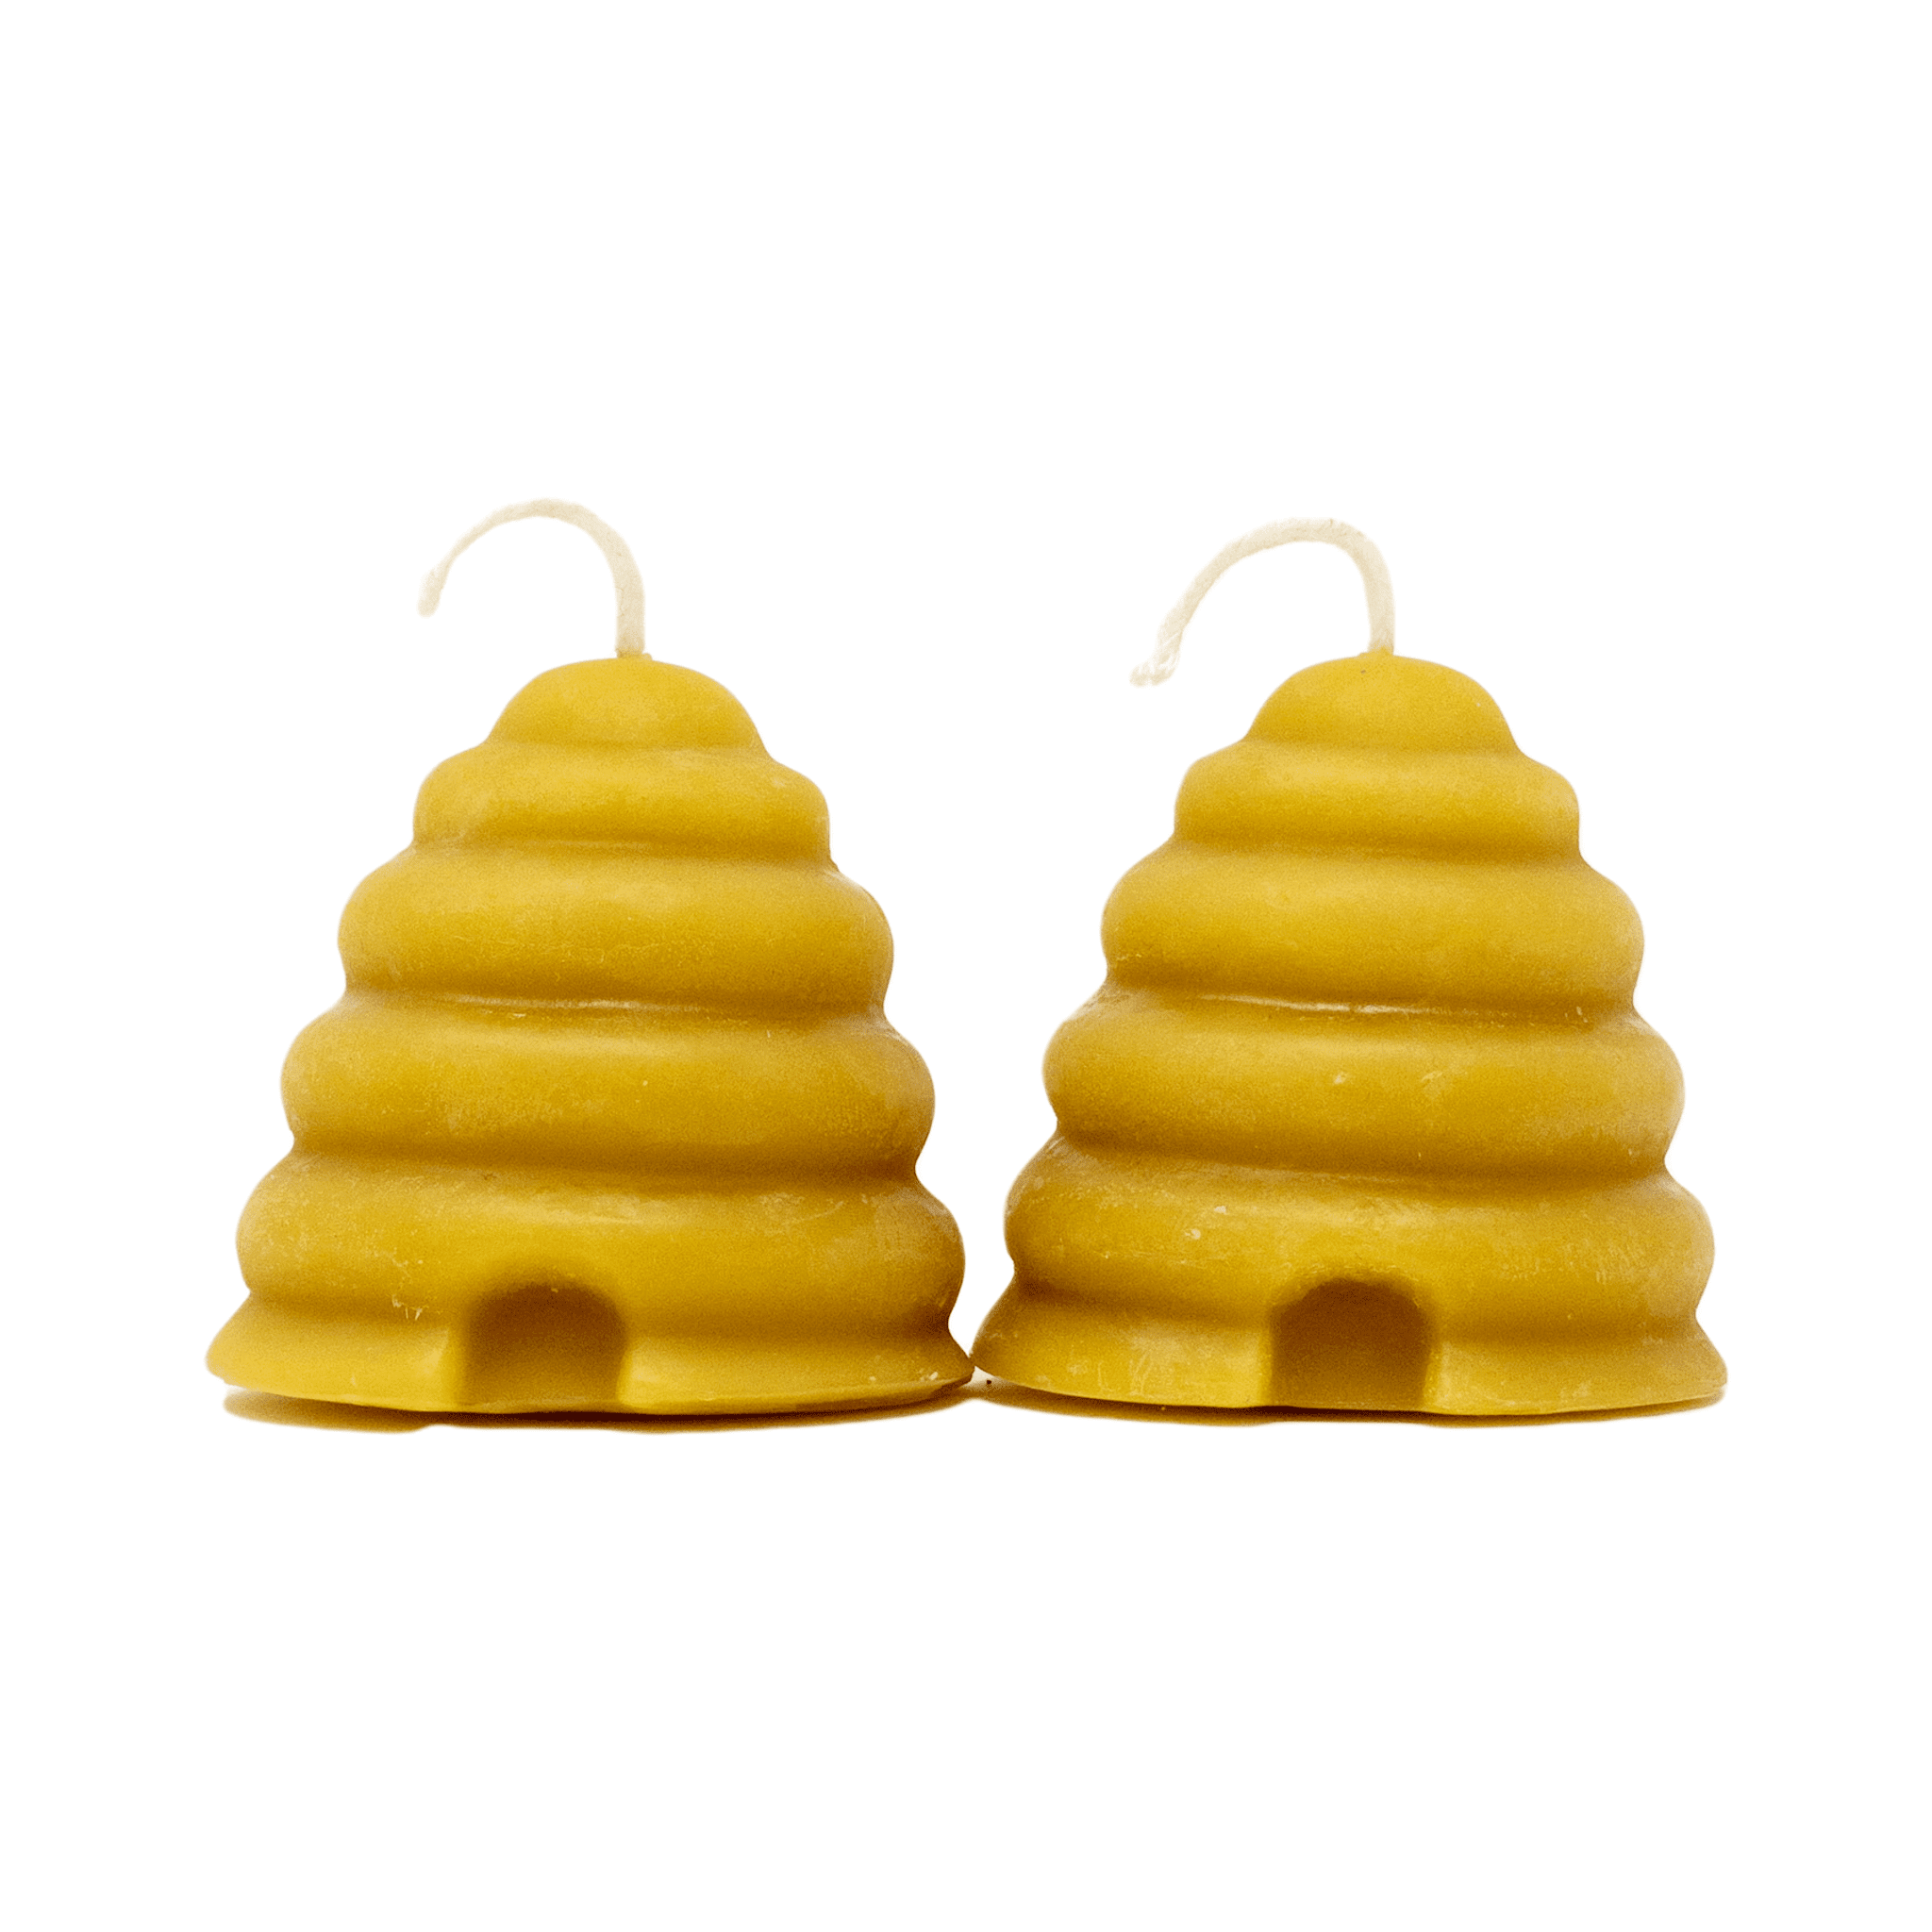 Beehive Votive - Pure Beeswax Candles